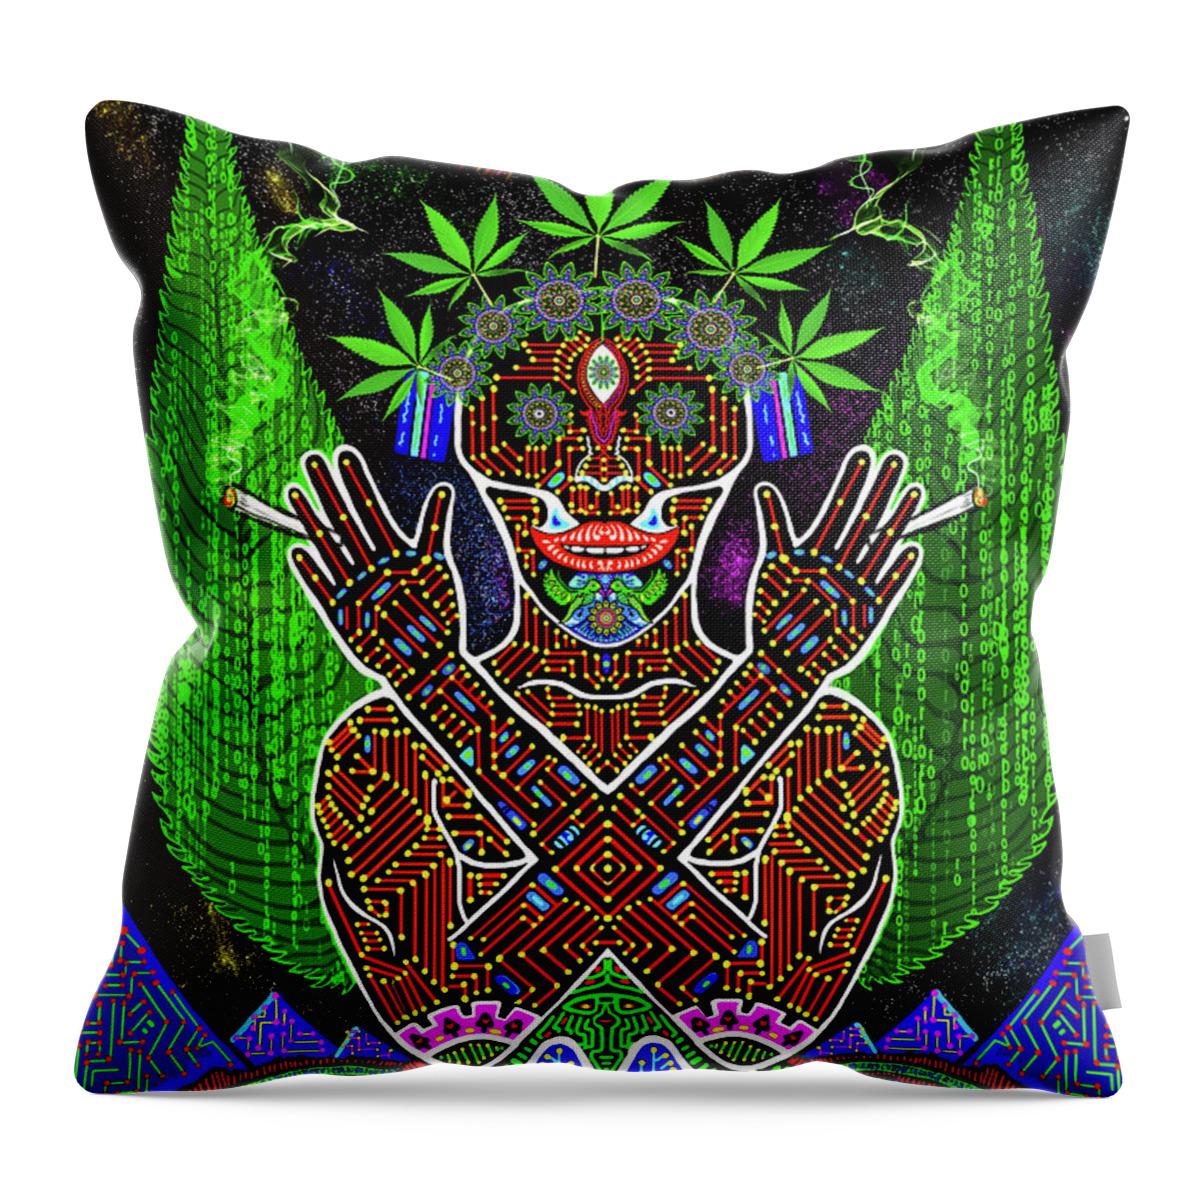 Visionary Art Throw Pillow featuring the digital art Yes we Cannabis by Myztico Campo